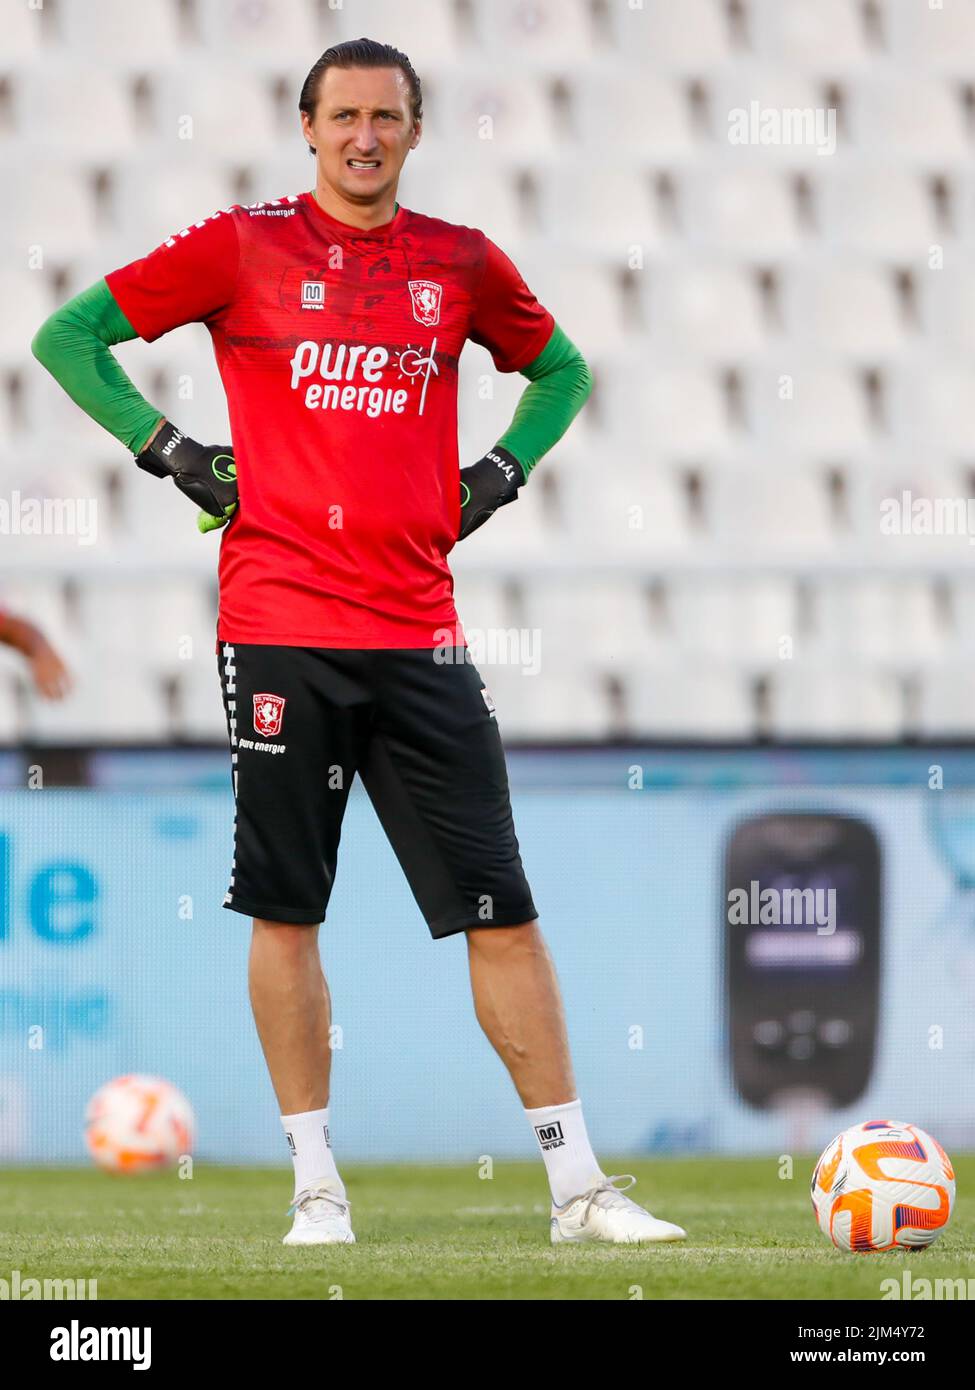 BELGRADE, SERBIA - AUGUST 4: Goalkeeper Przemyslaw Tyton of FC Twente during the UEFA Europa Conference League third qualifying round match between FK Cukaricki and FC Twente at Stadion FK Partizan on August 4, 2022 in Belgrade, Serbia (Photo by Nicola Krstic/Orange Pictures) Stock Photo